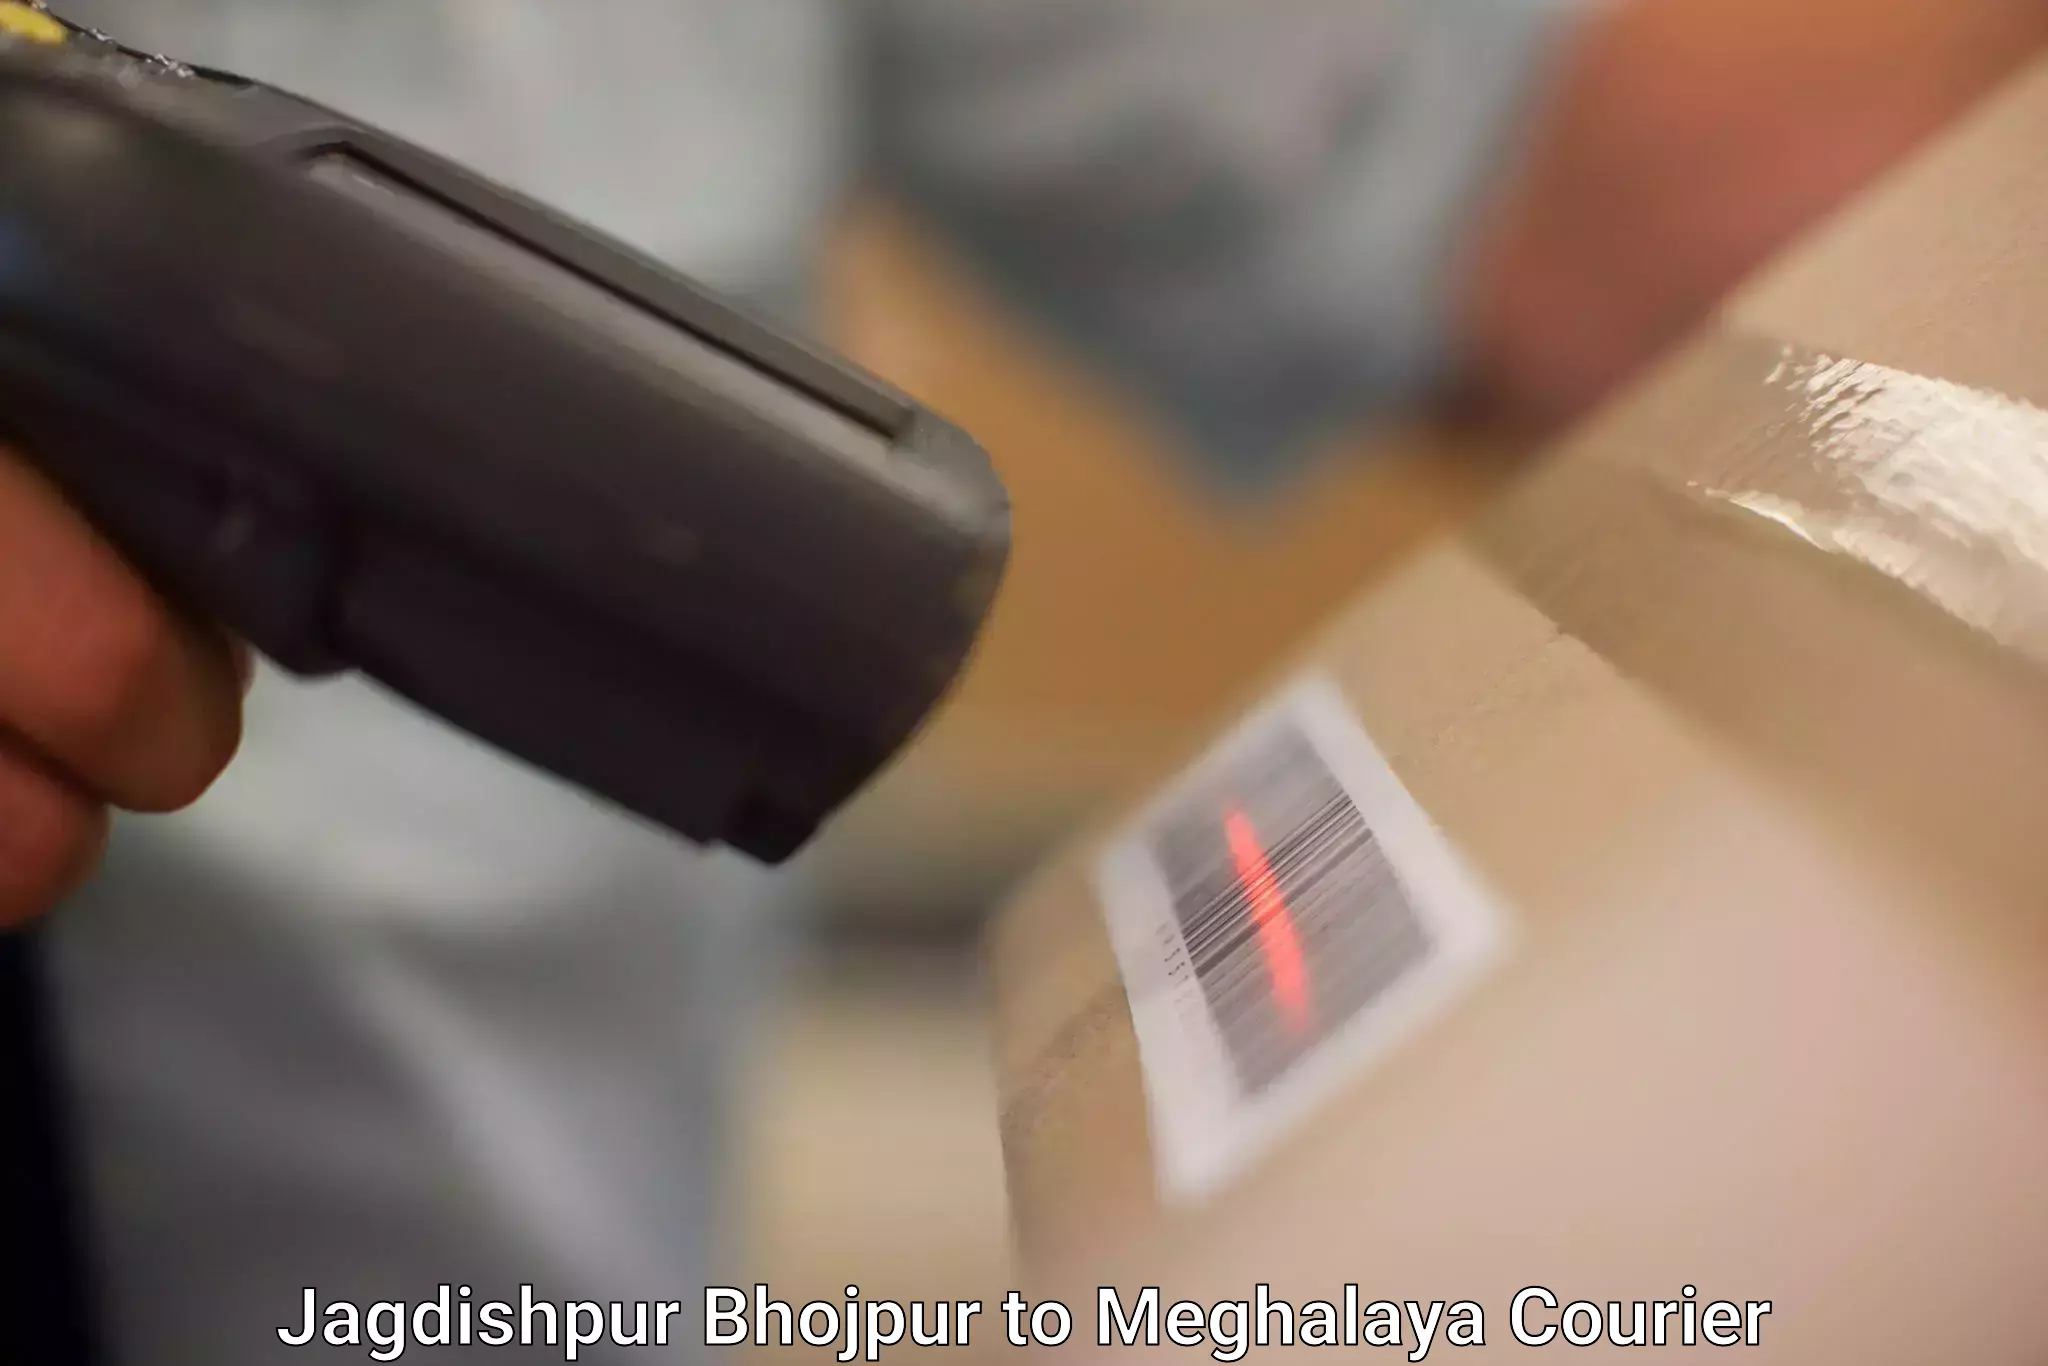 Small business couriers Jagdishpur Bhojpur to Shillong